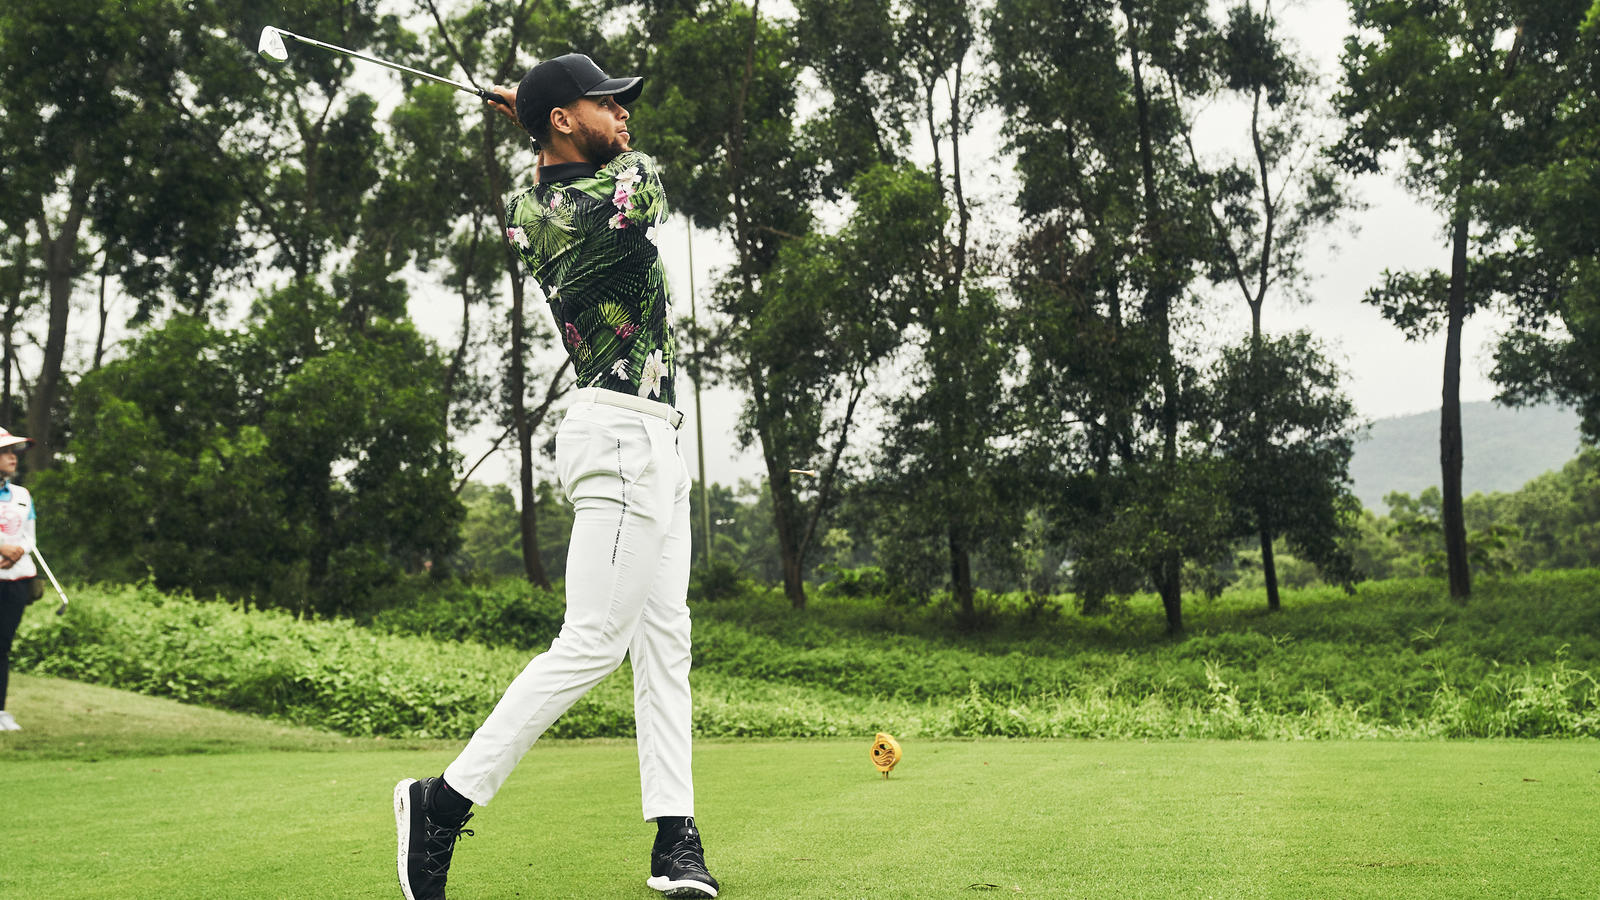 NBA star Stephen Curry and Under Armour debut new golf collection